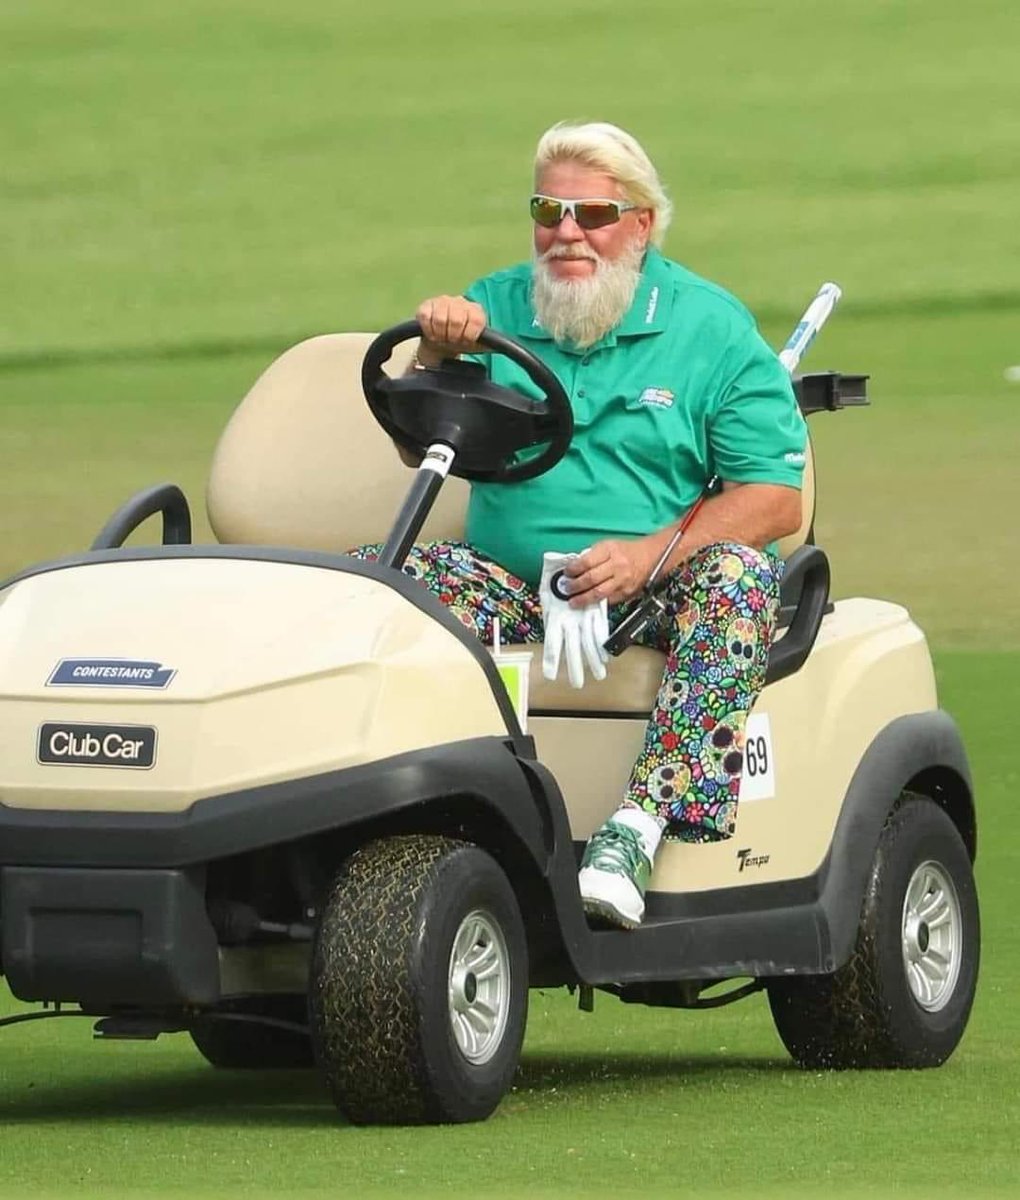 John Daly driving golf cart #69 in PGA events while smoking heaters, slamming M&M's, & beer bonging Diet Cokes looking like if the state of Florida was a person. What a legend. 

Hooters, the restaurant chain, sponsors both Daly and his son, who might have even been conceived in